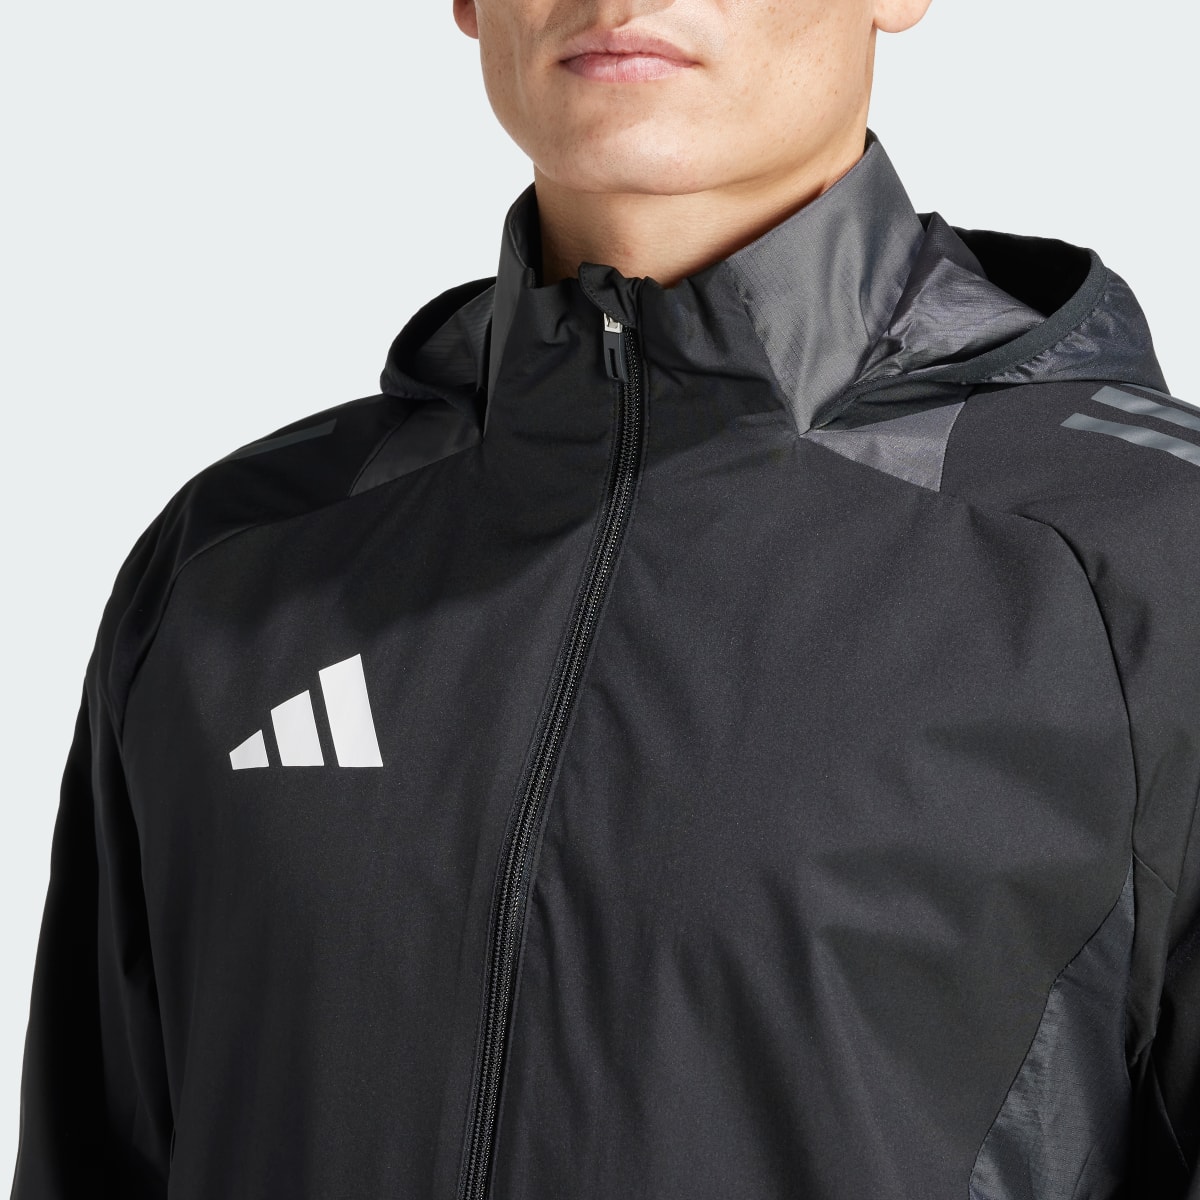 Adidas Tiro 24 Competition All-Weather Jacket. 7